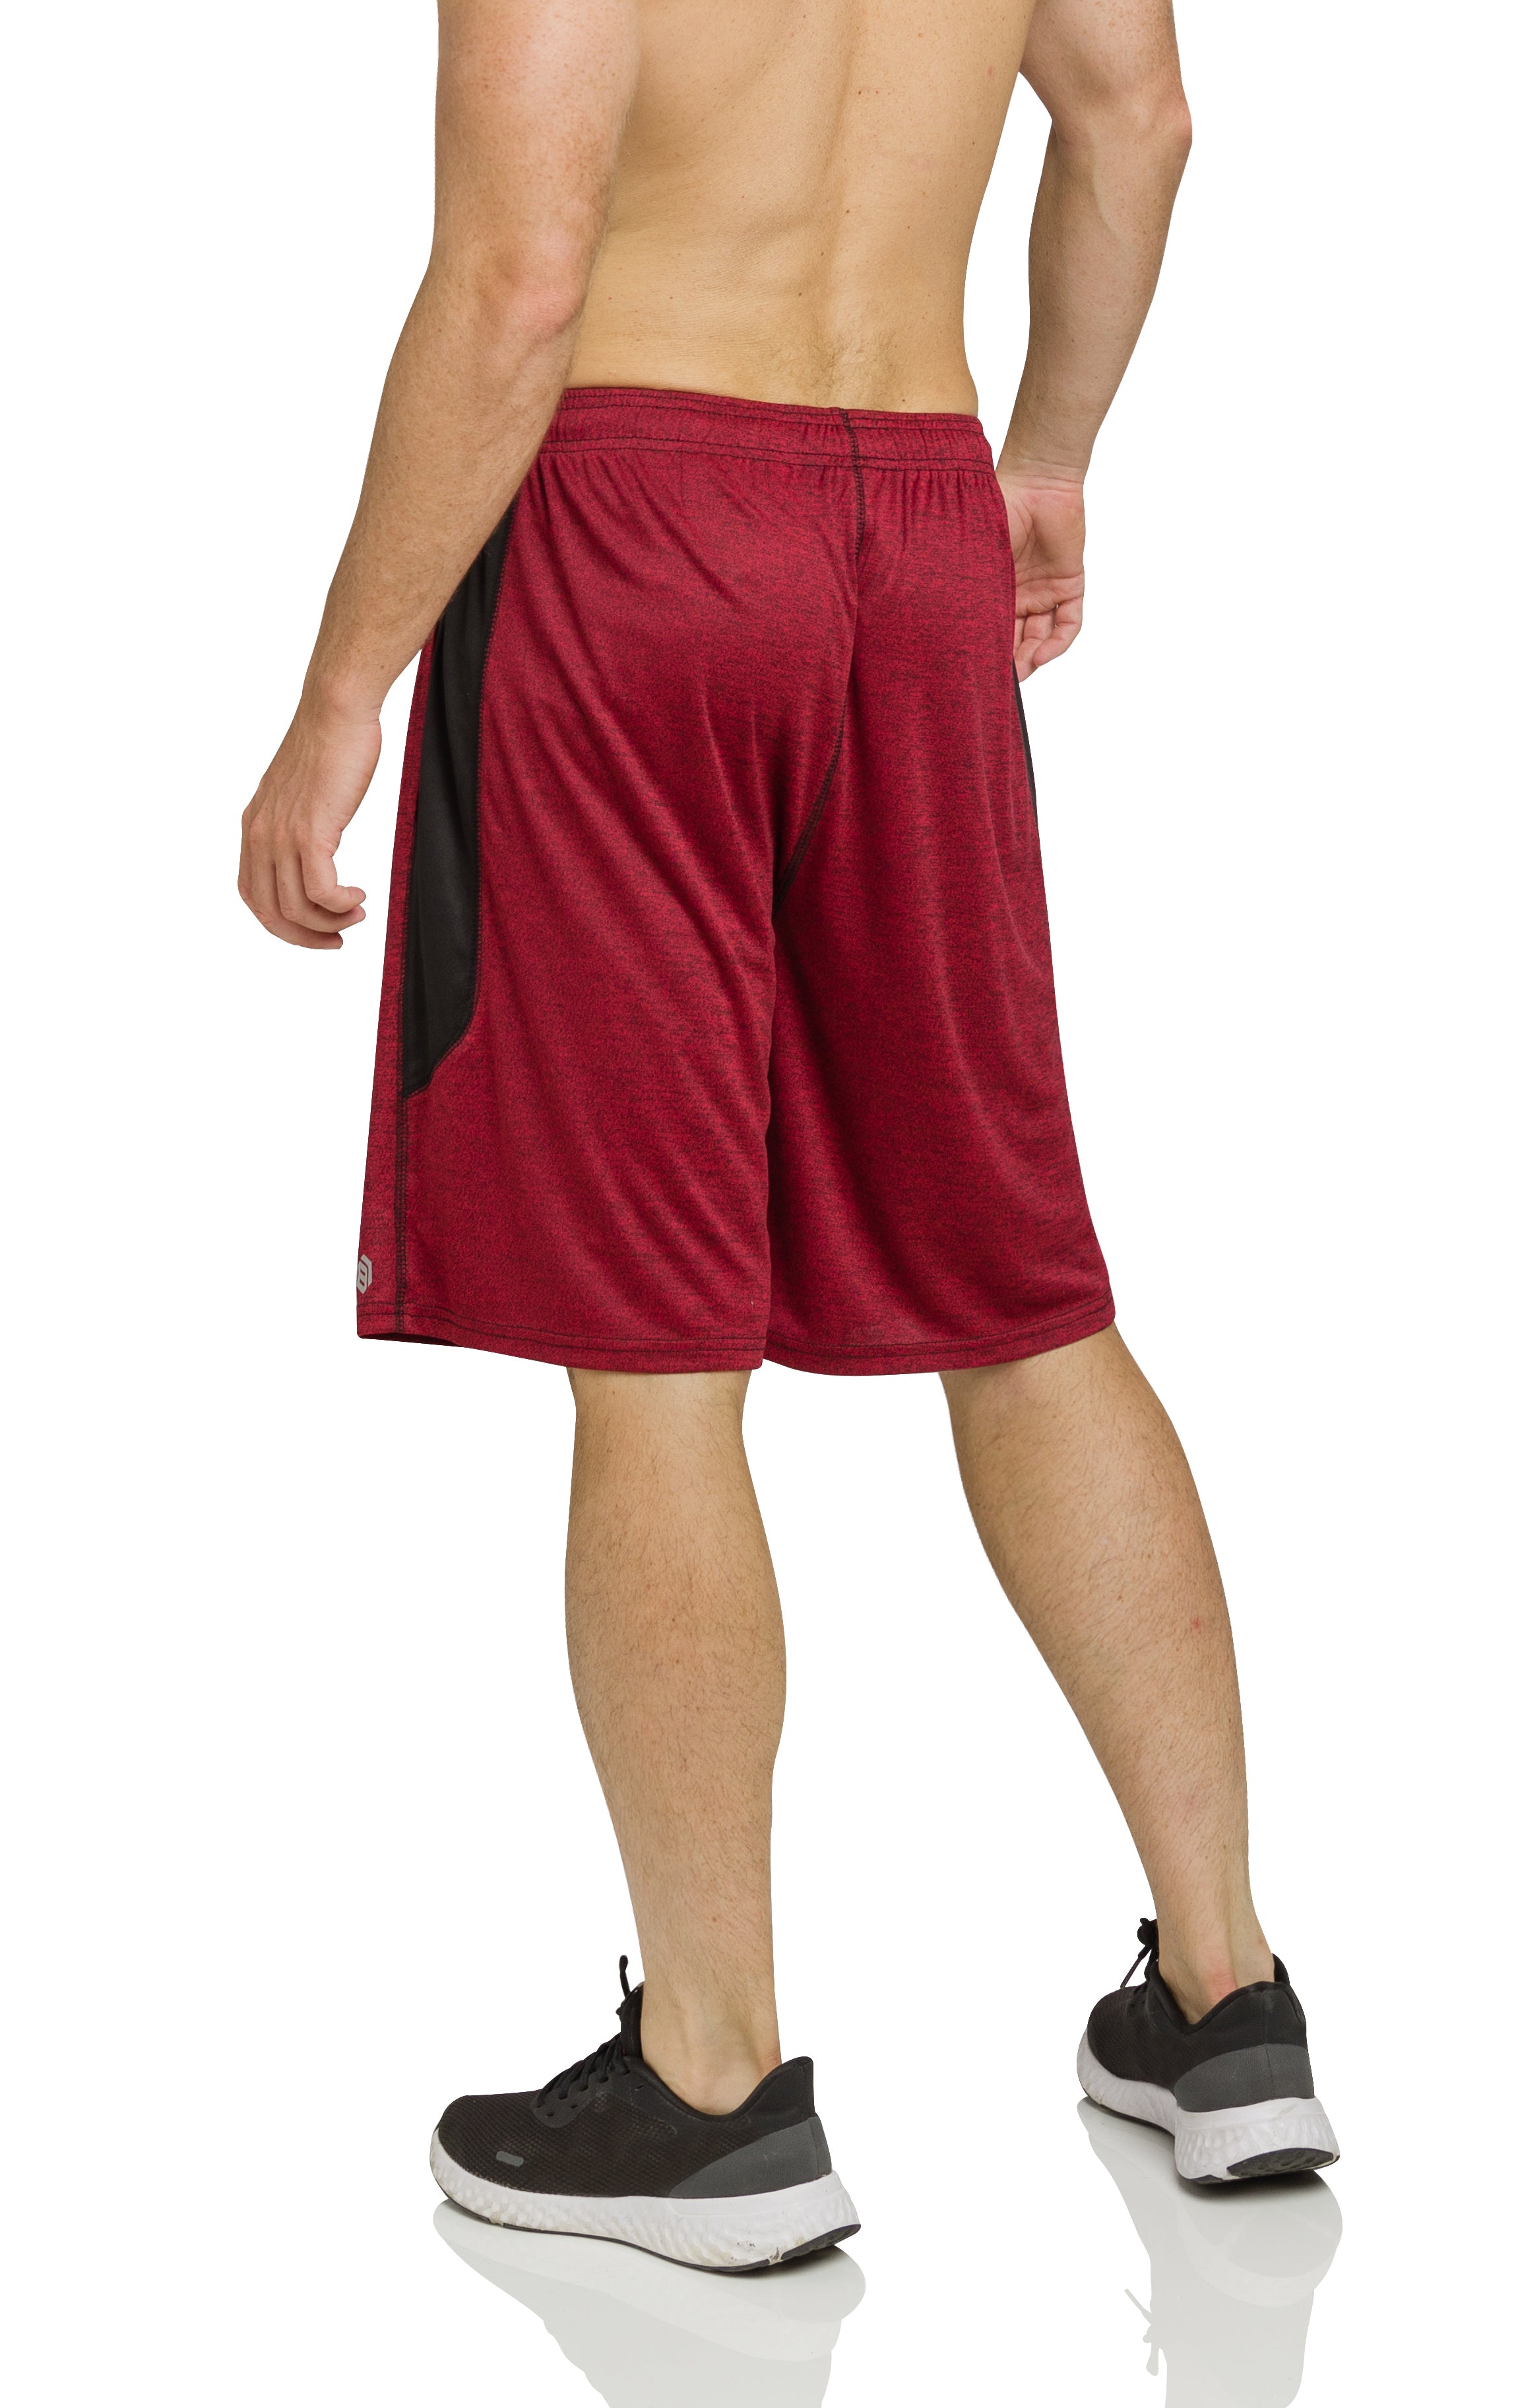 Men's Premium Dry Fit Active Shorts - Basketball Edition | 5 Pack